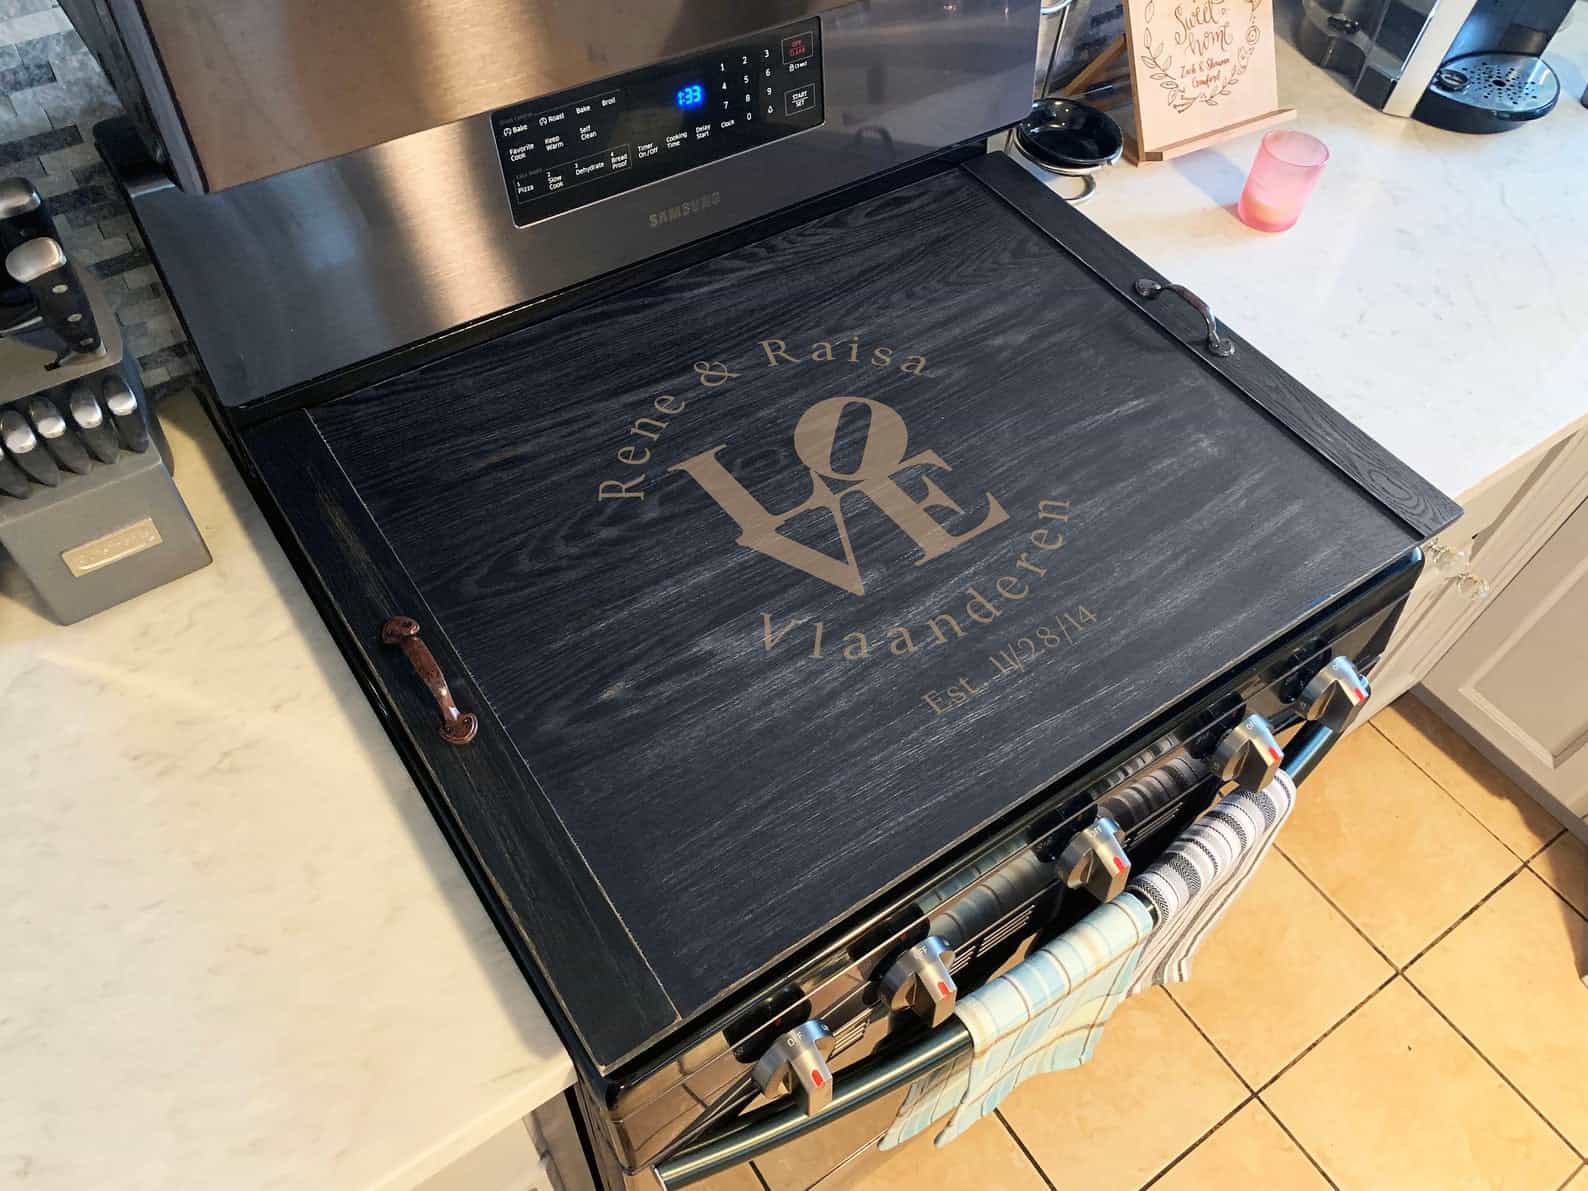 Personalized stove top cover